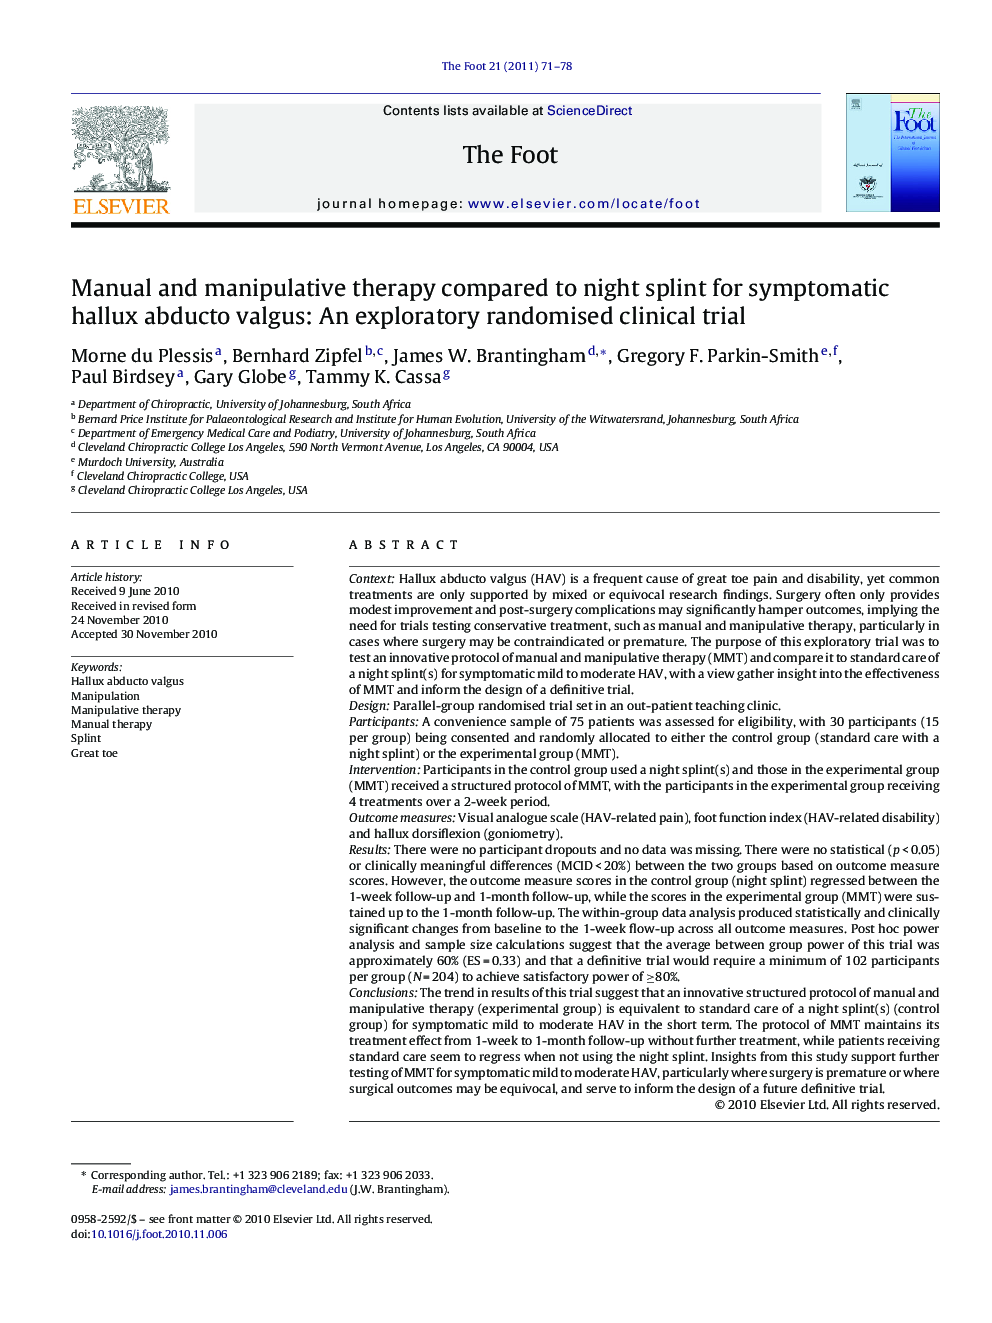 Manual and manipulative therapy compared to night splint for symptomatic hallux abducto valgus: An exploratory randomised clinical trial